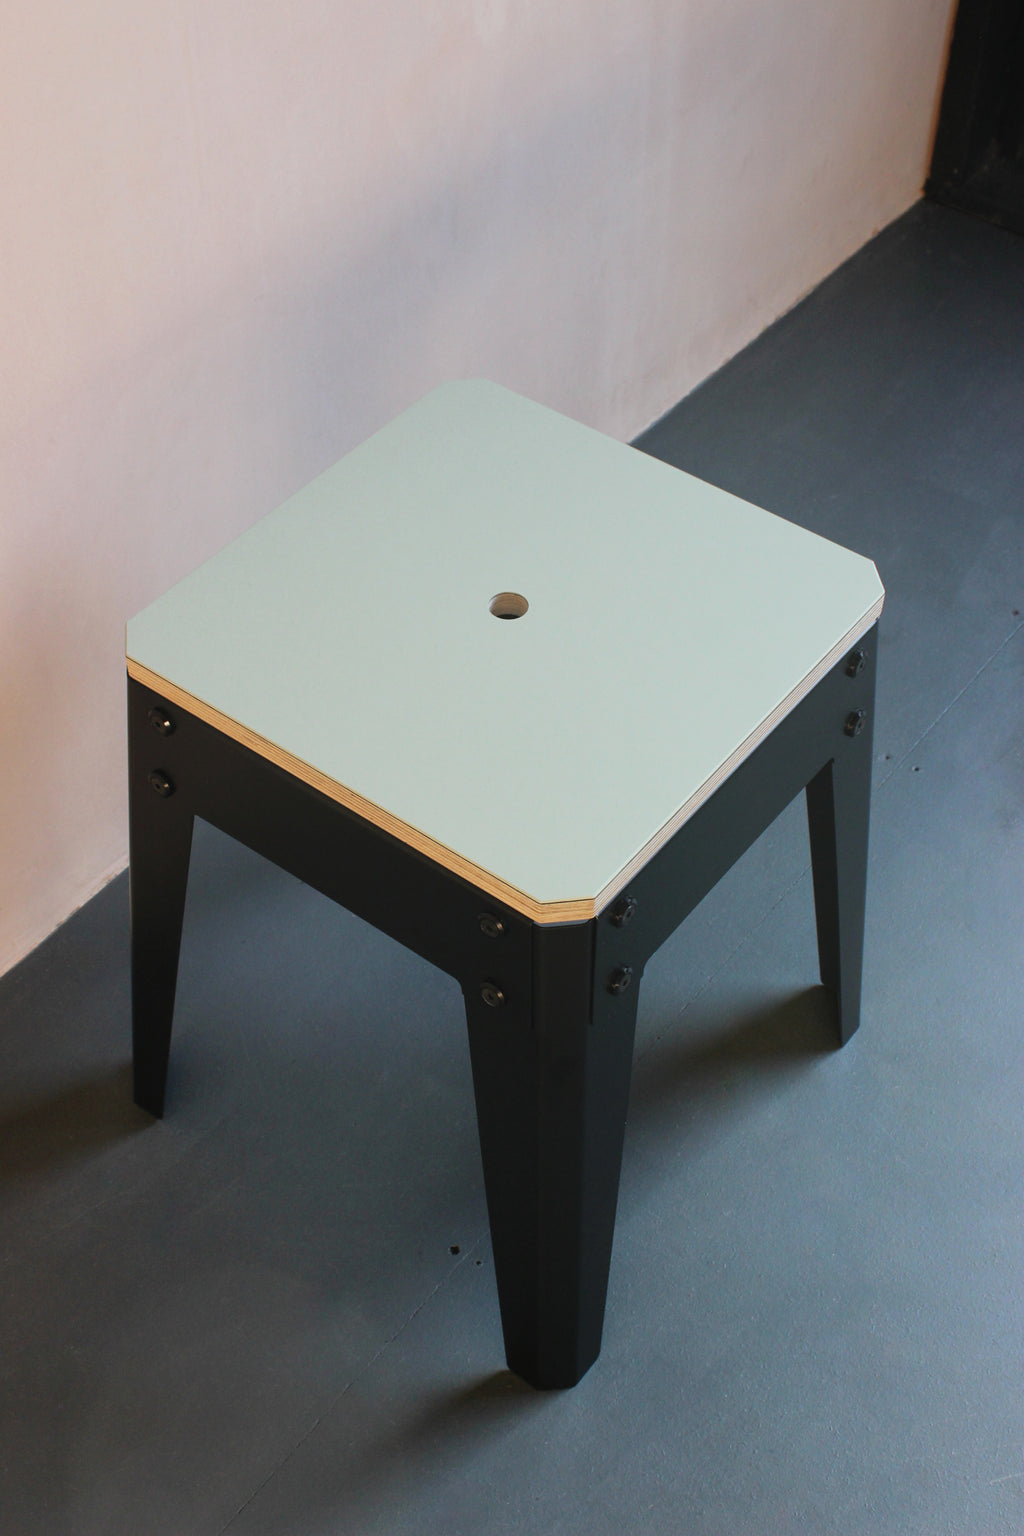 Our low stool is designed and made by Jon Grant London in Leyton, East London. It features metal powder coated legs with Forbo lino top.